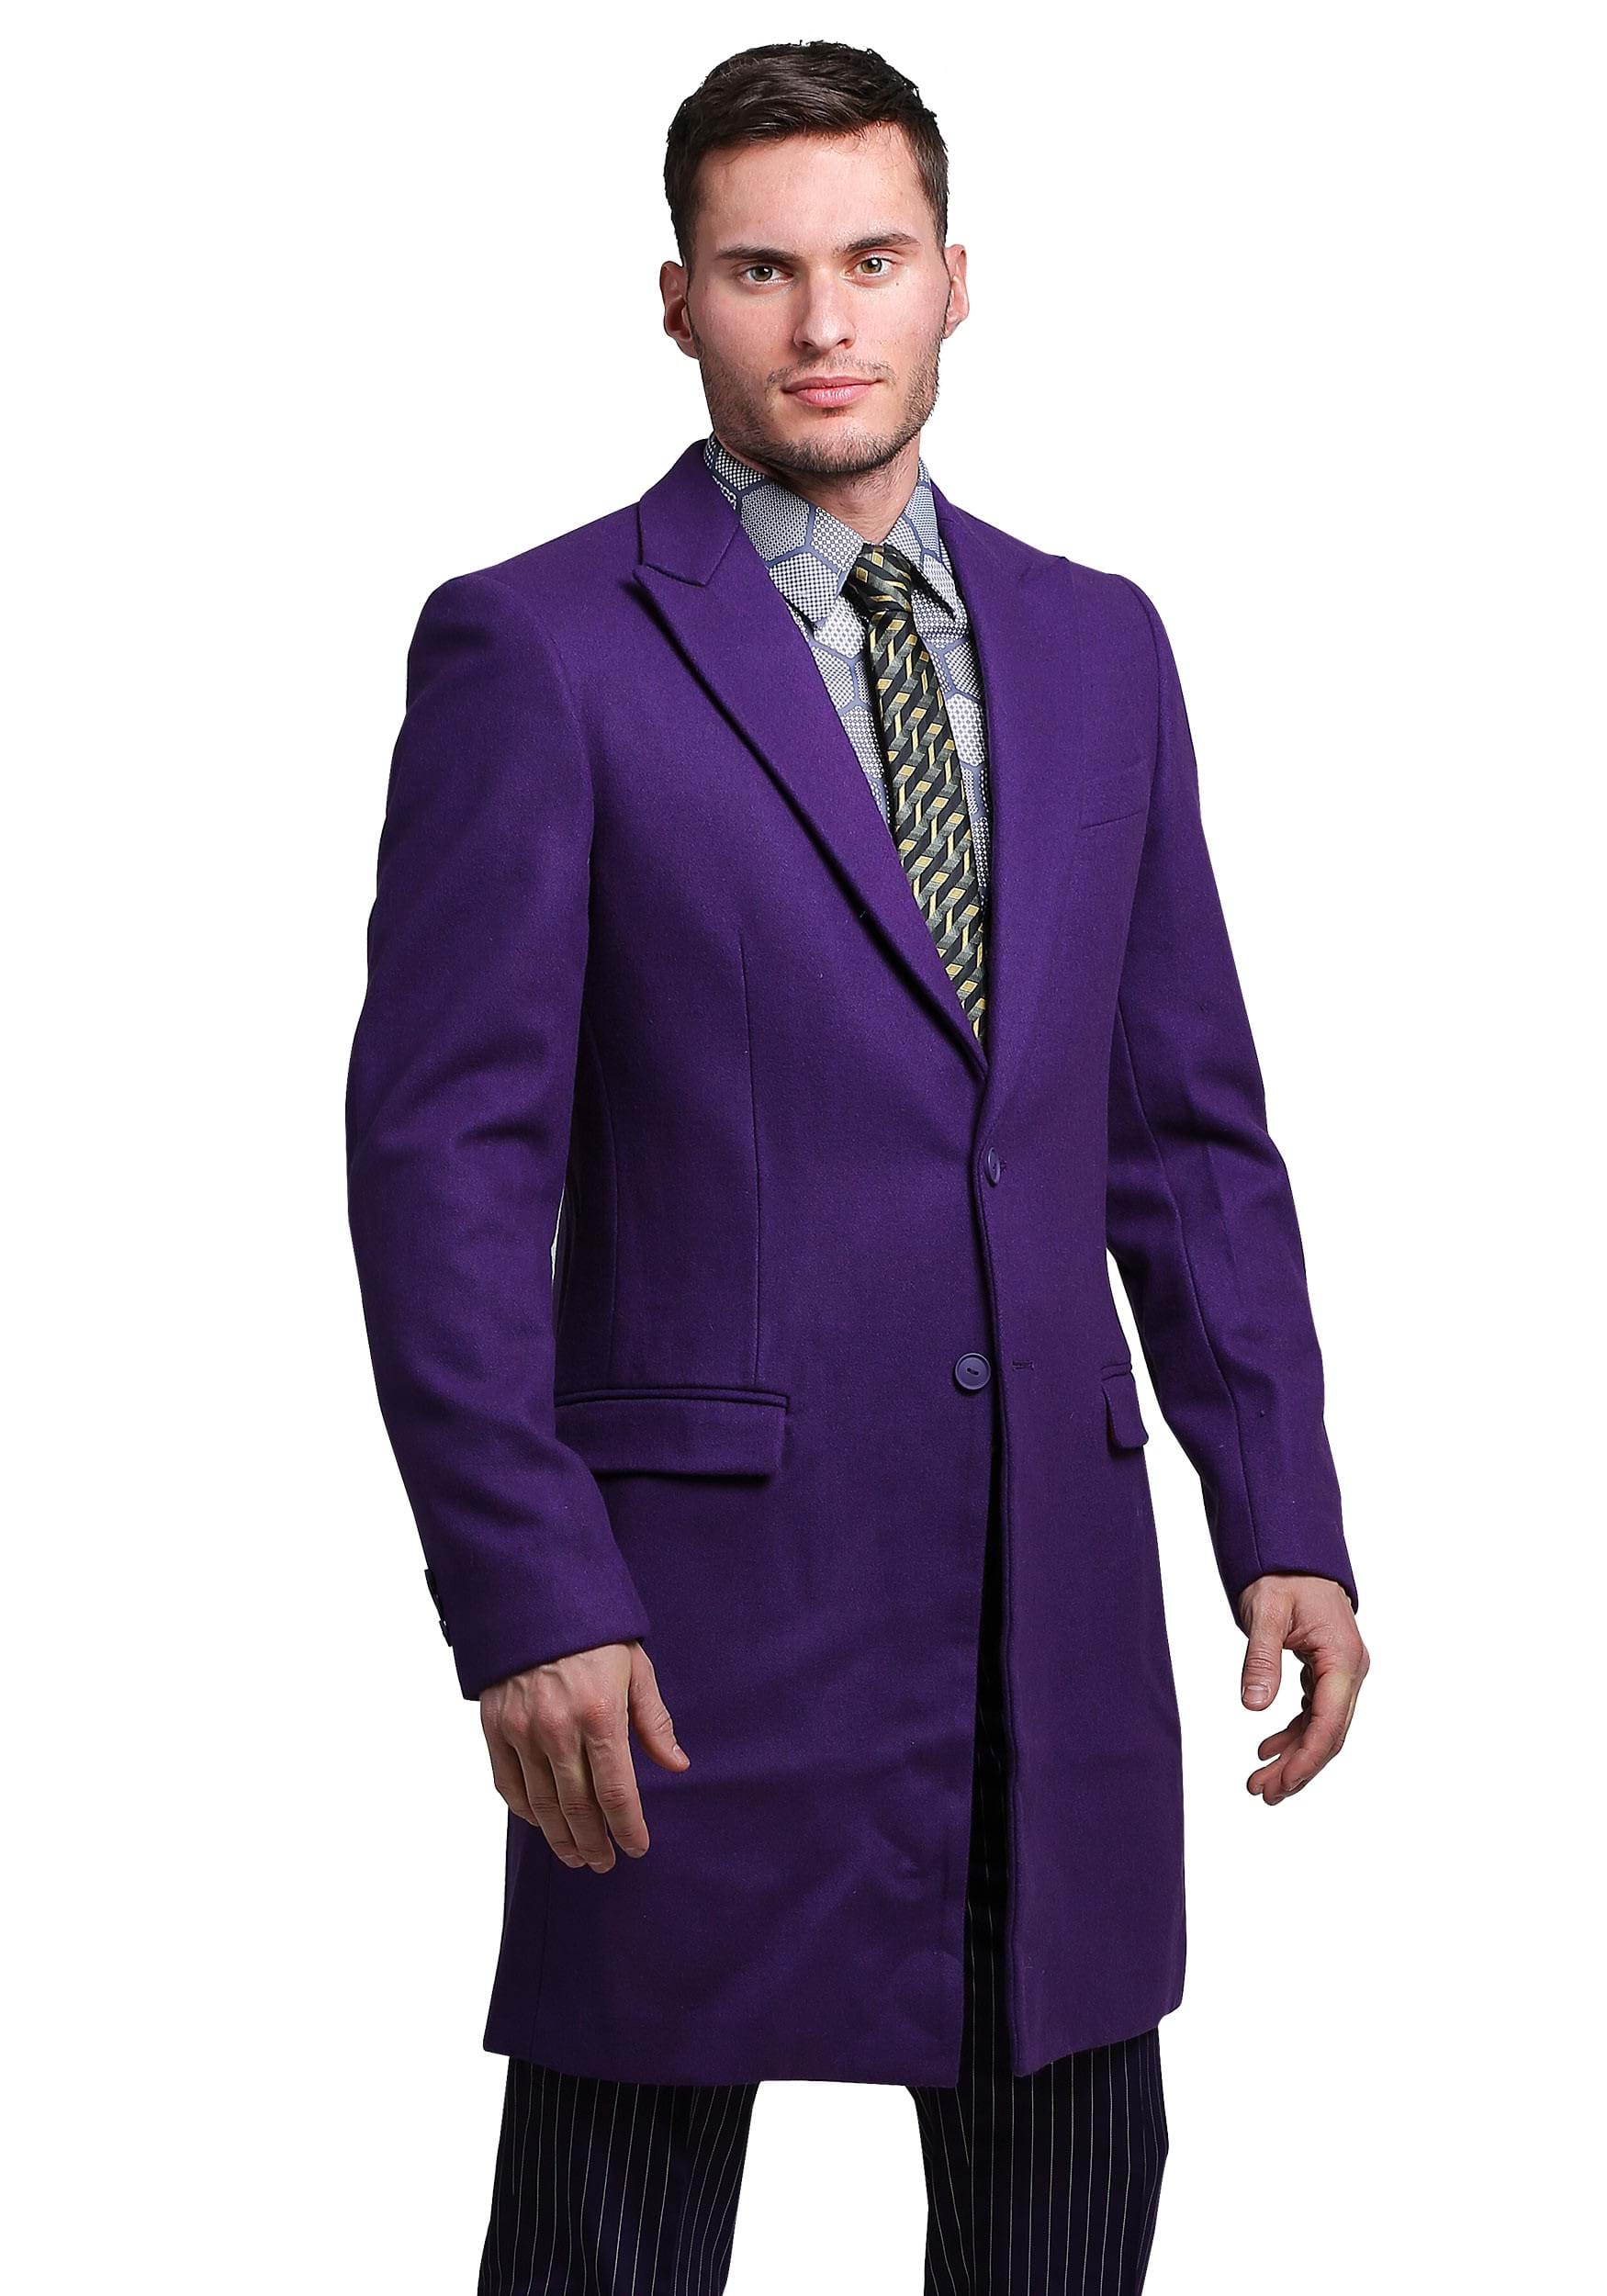 Image of THE JOKER Slim Fit Suit Overcoat (Authentic) ID FUN9011O-36